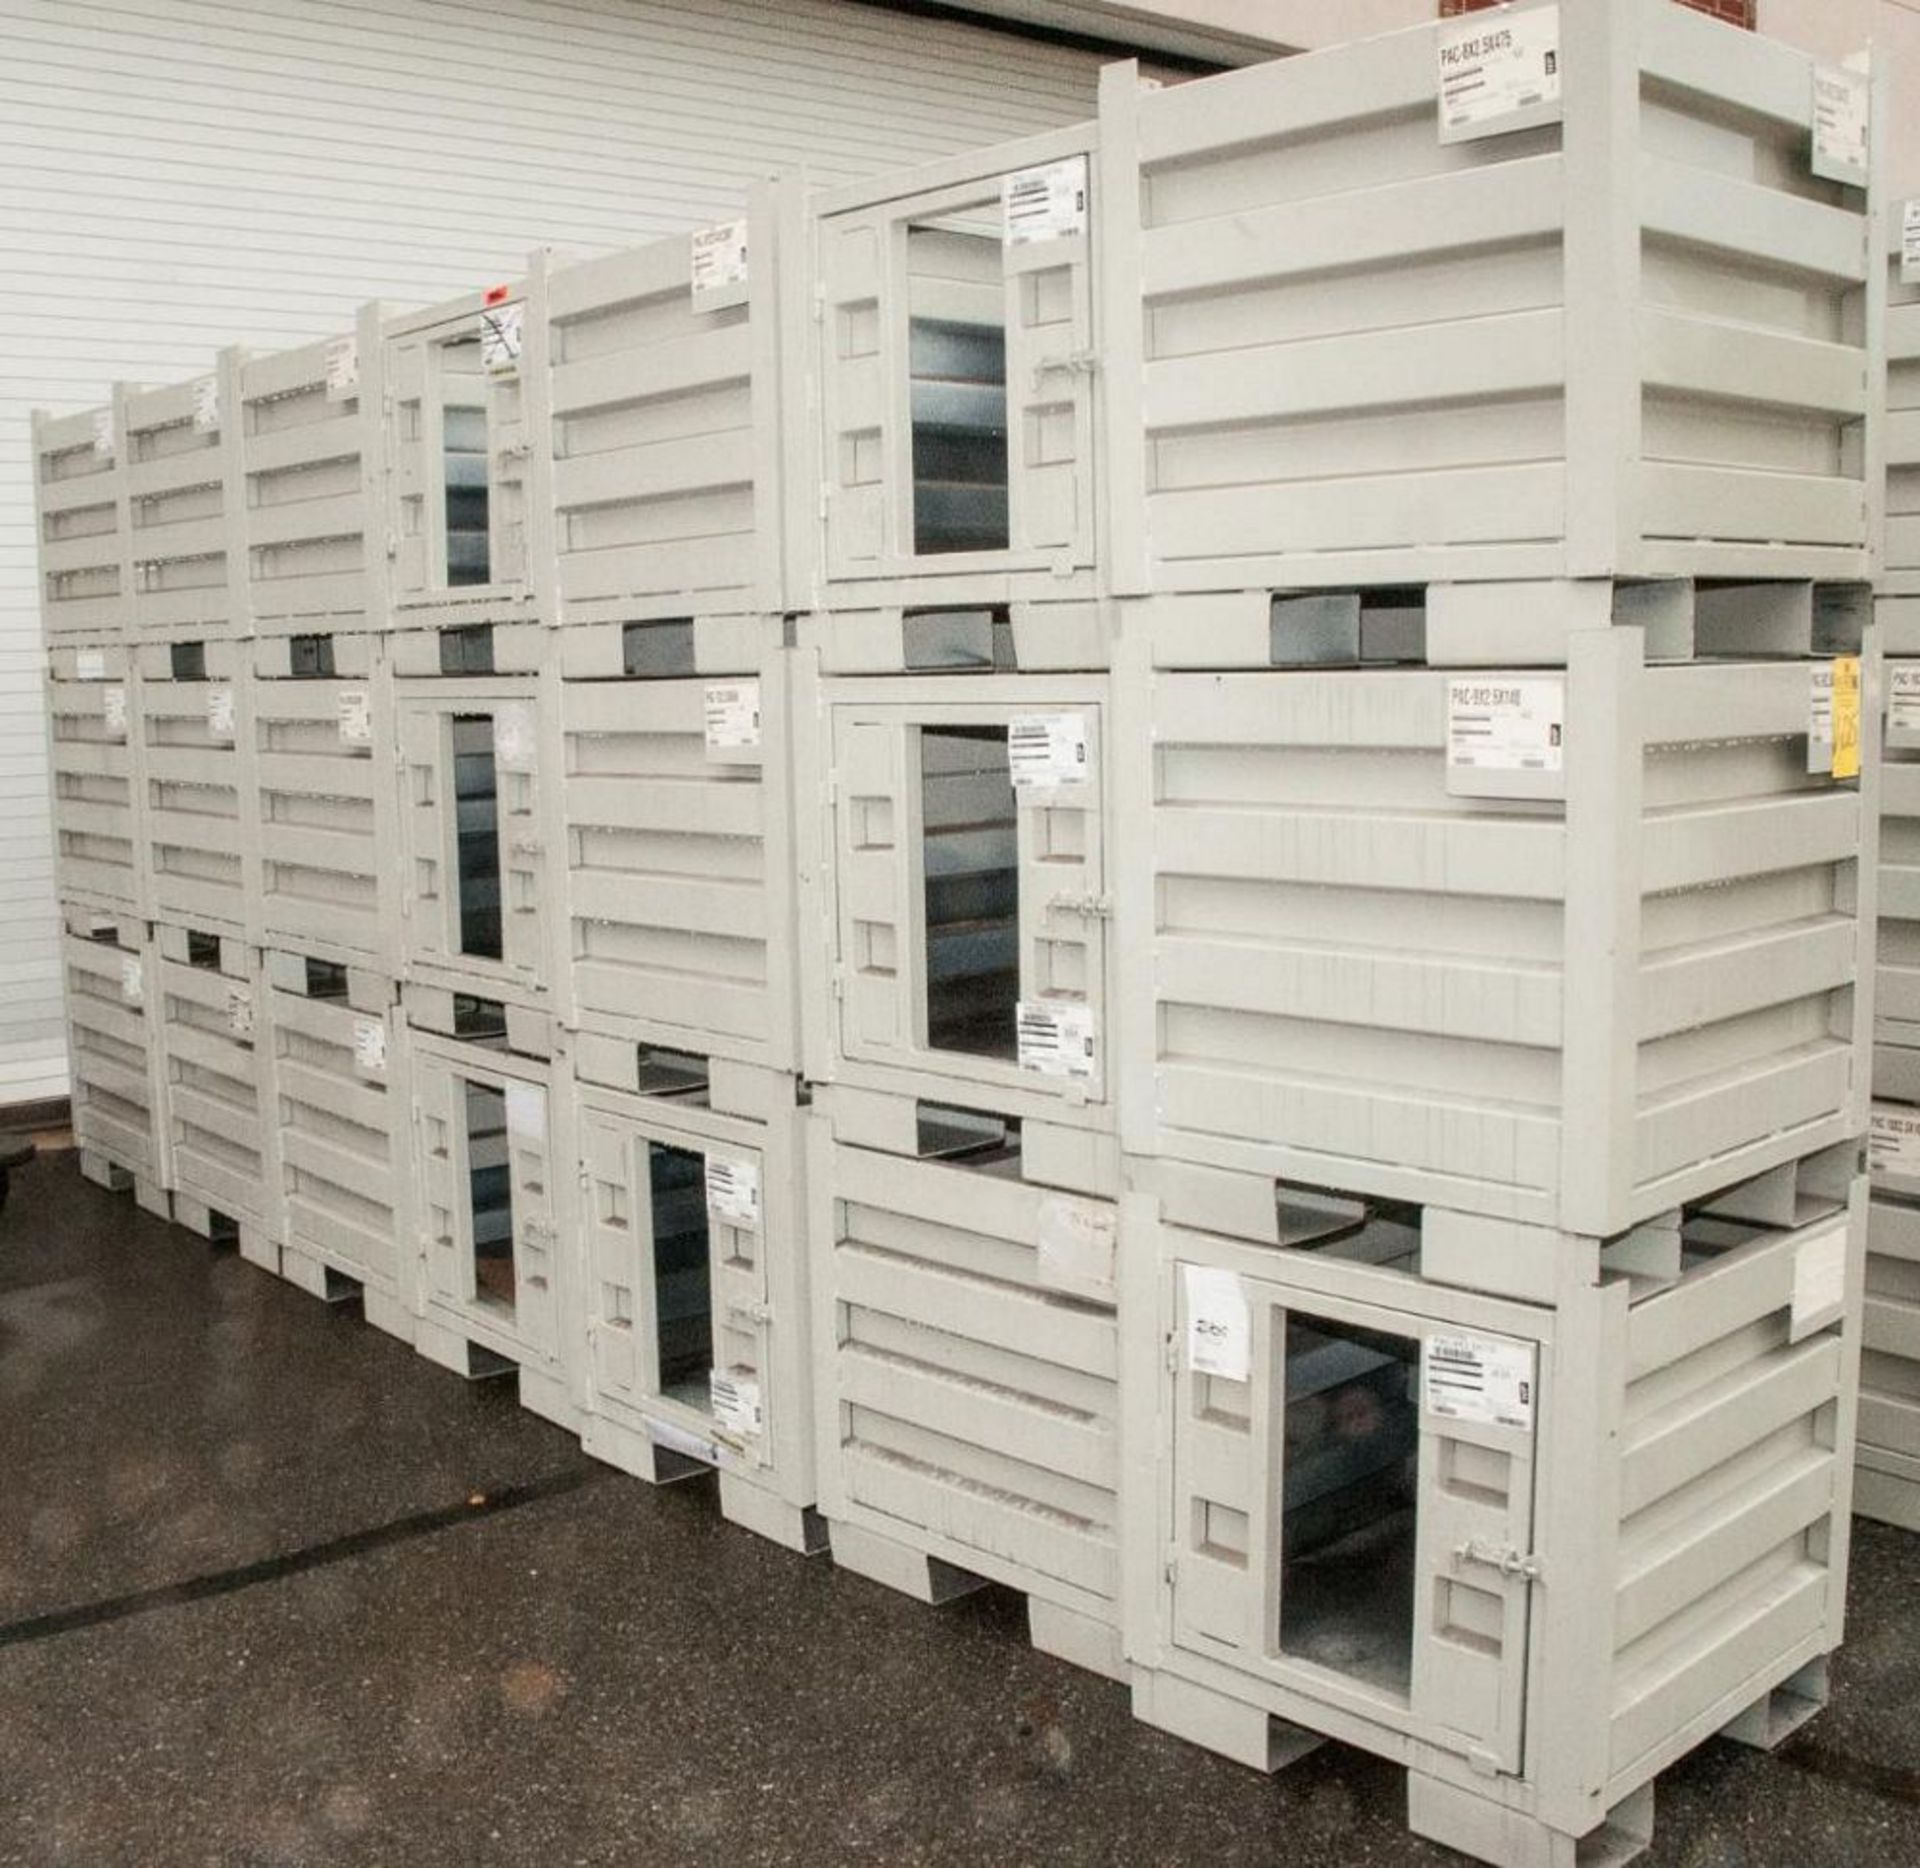 (21) Steel Stacking Bins with Door, OD Approx. 29 1/2" x 29 1/2" x 32" Tall, No contents - Bild 2 aus 2